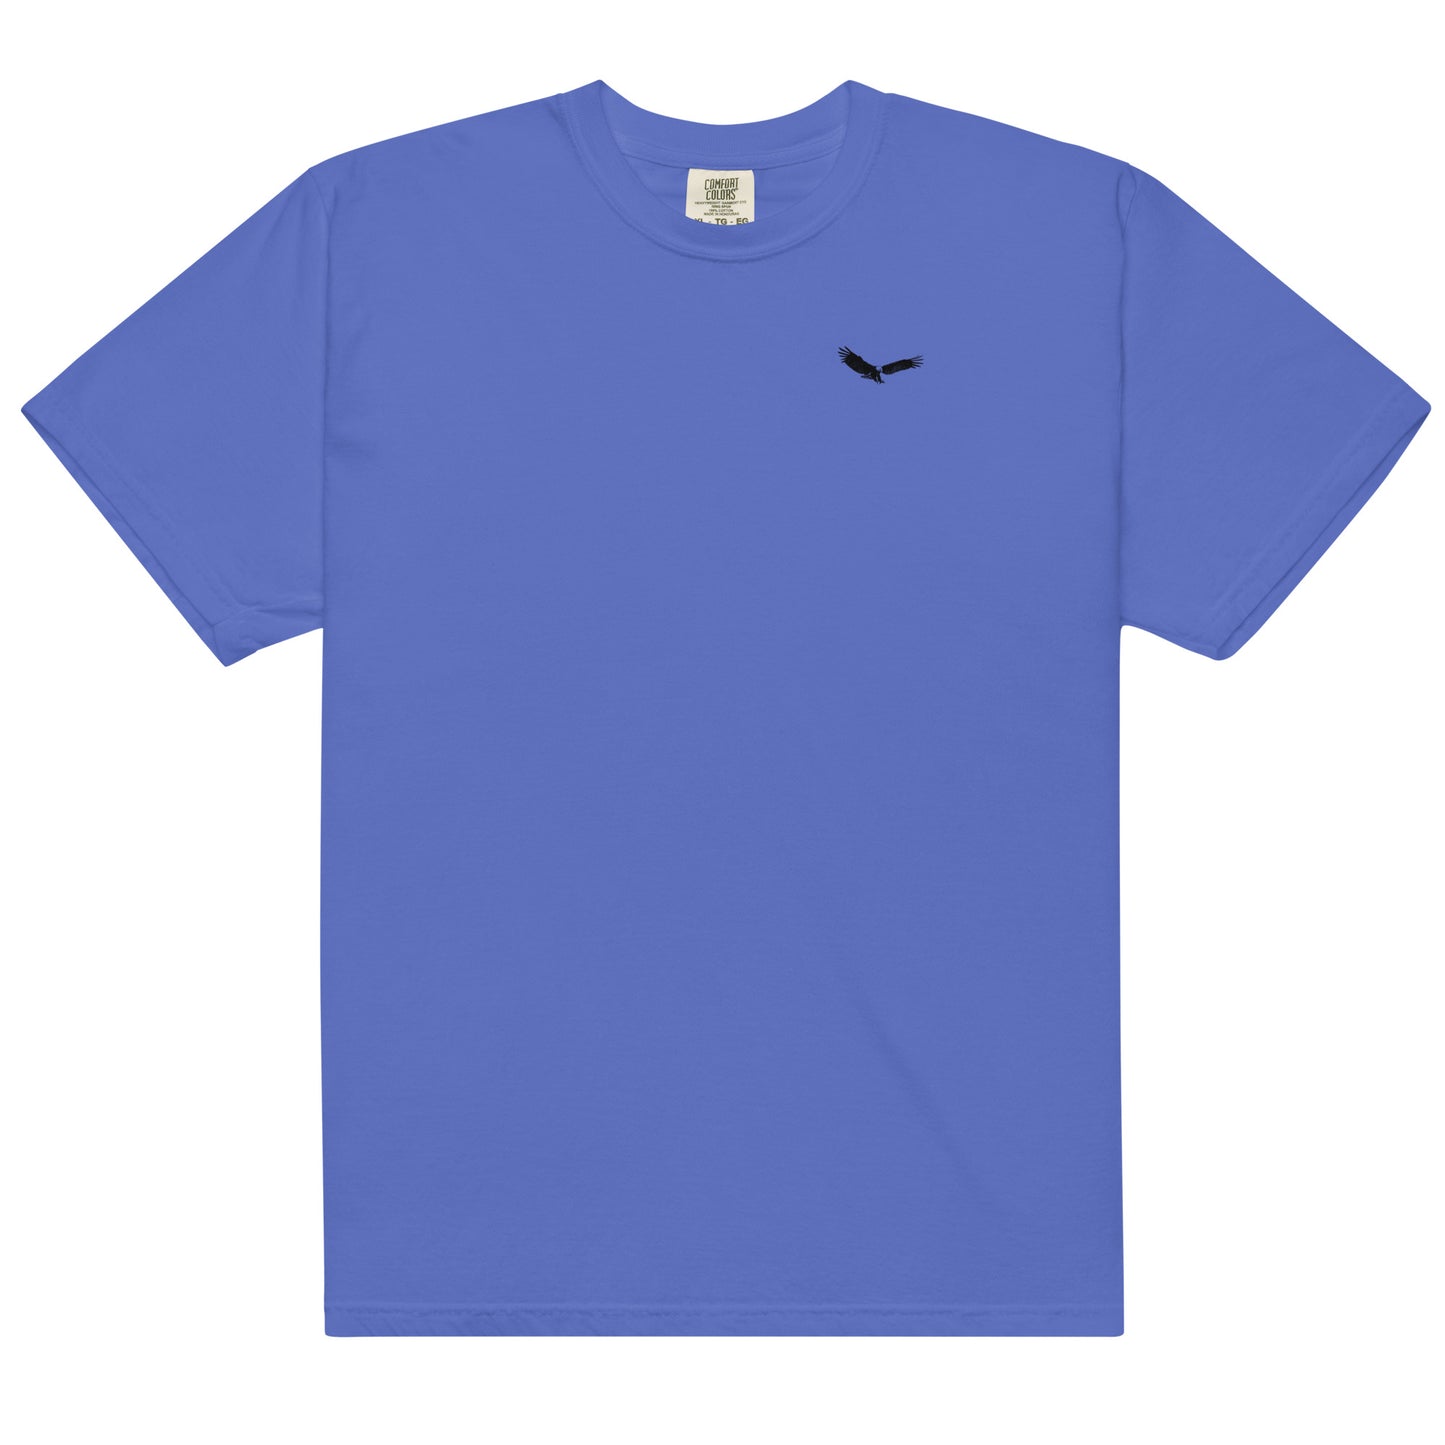 Species of Ucluelet Garment-Dyed Tee